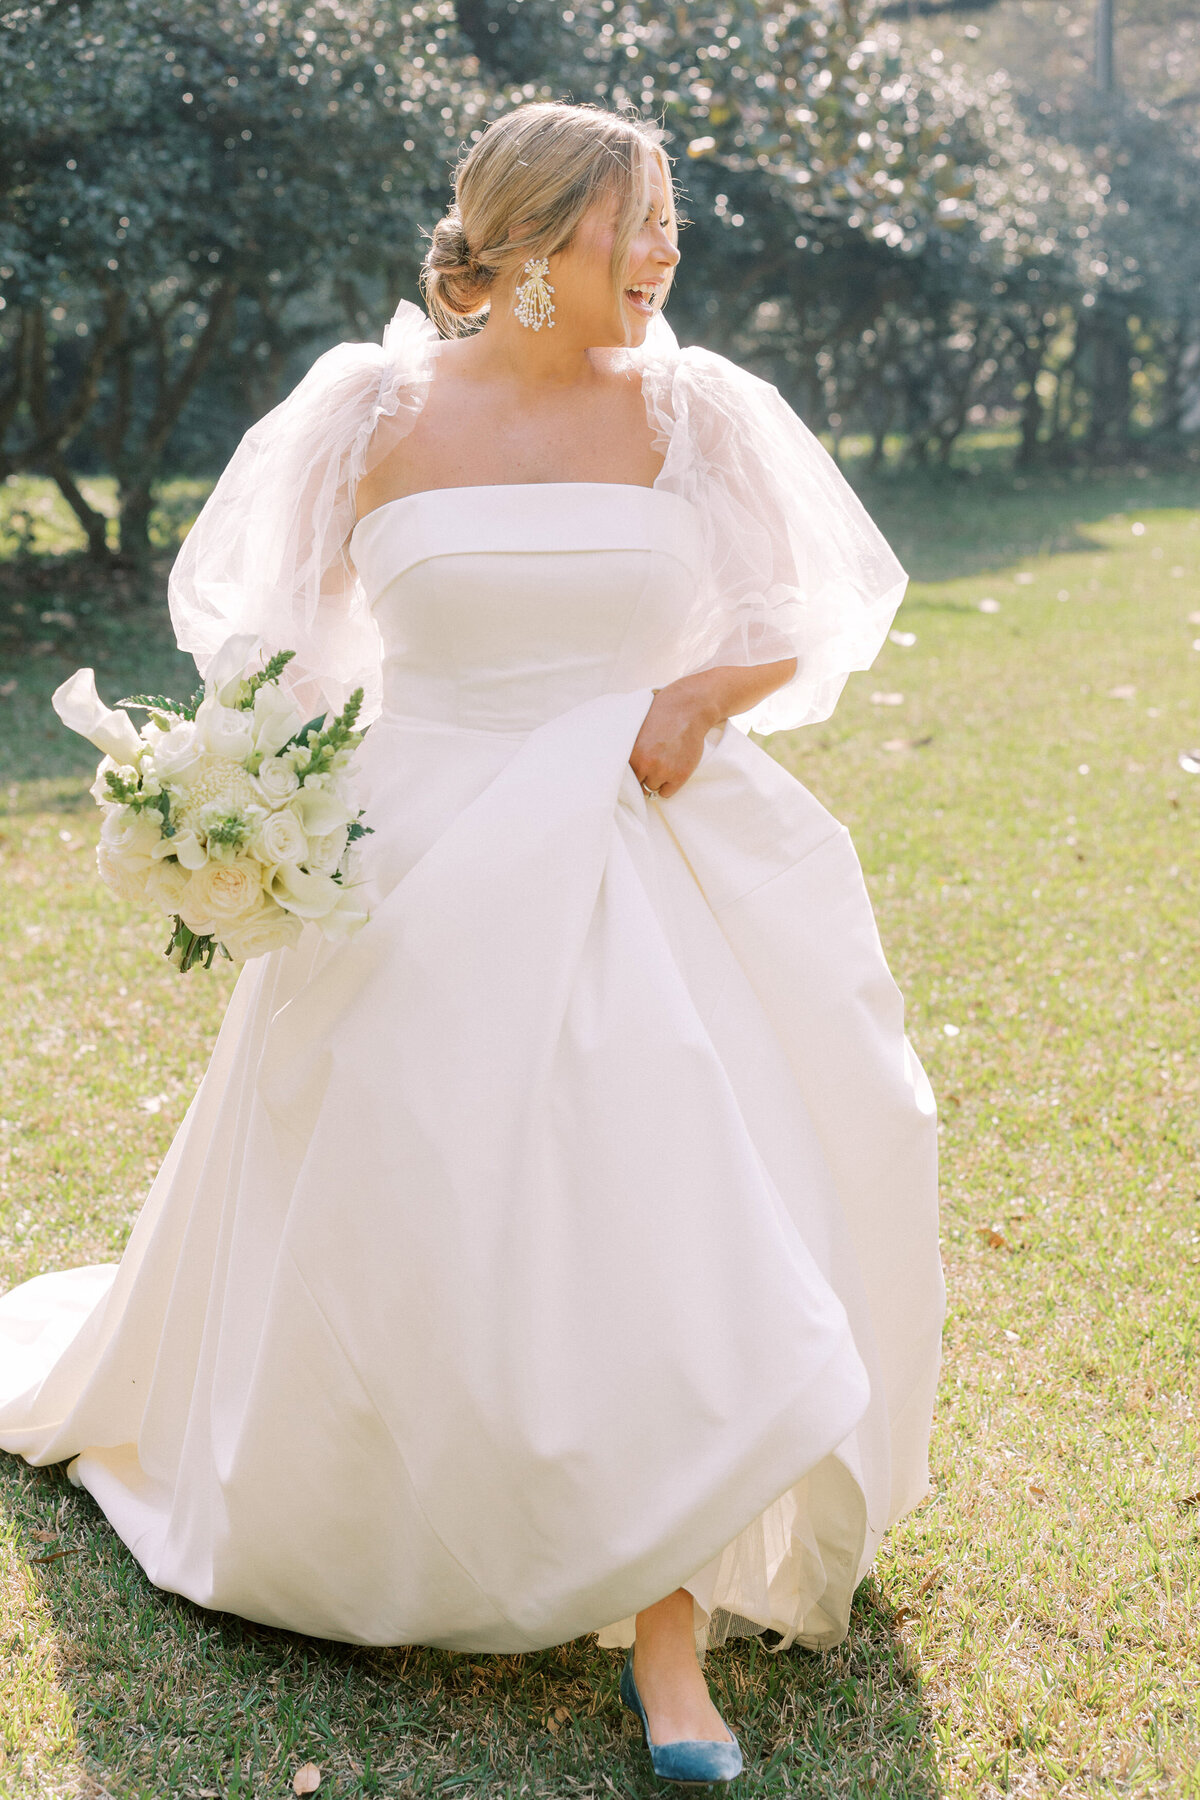 Stunning bride walks while carrying her bridal bouquet